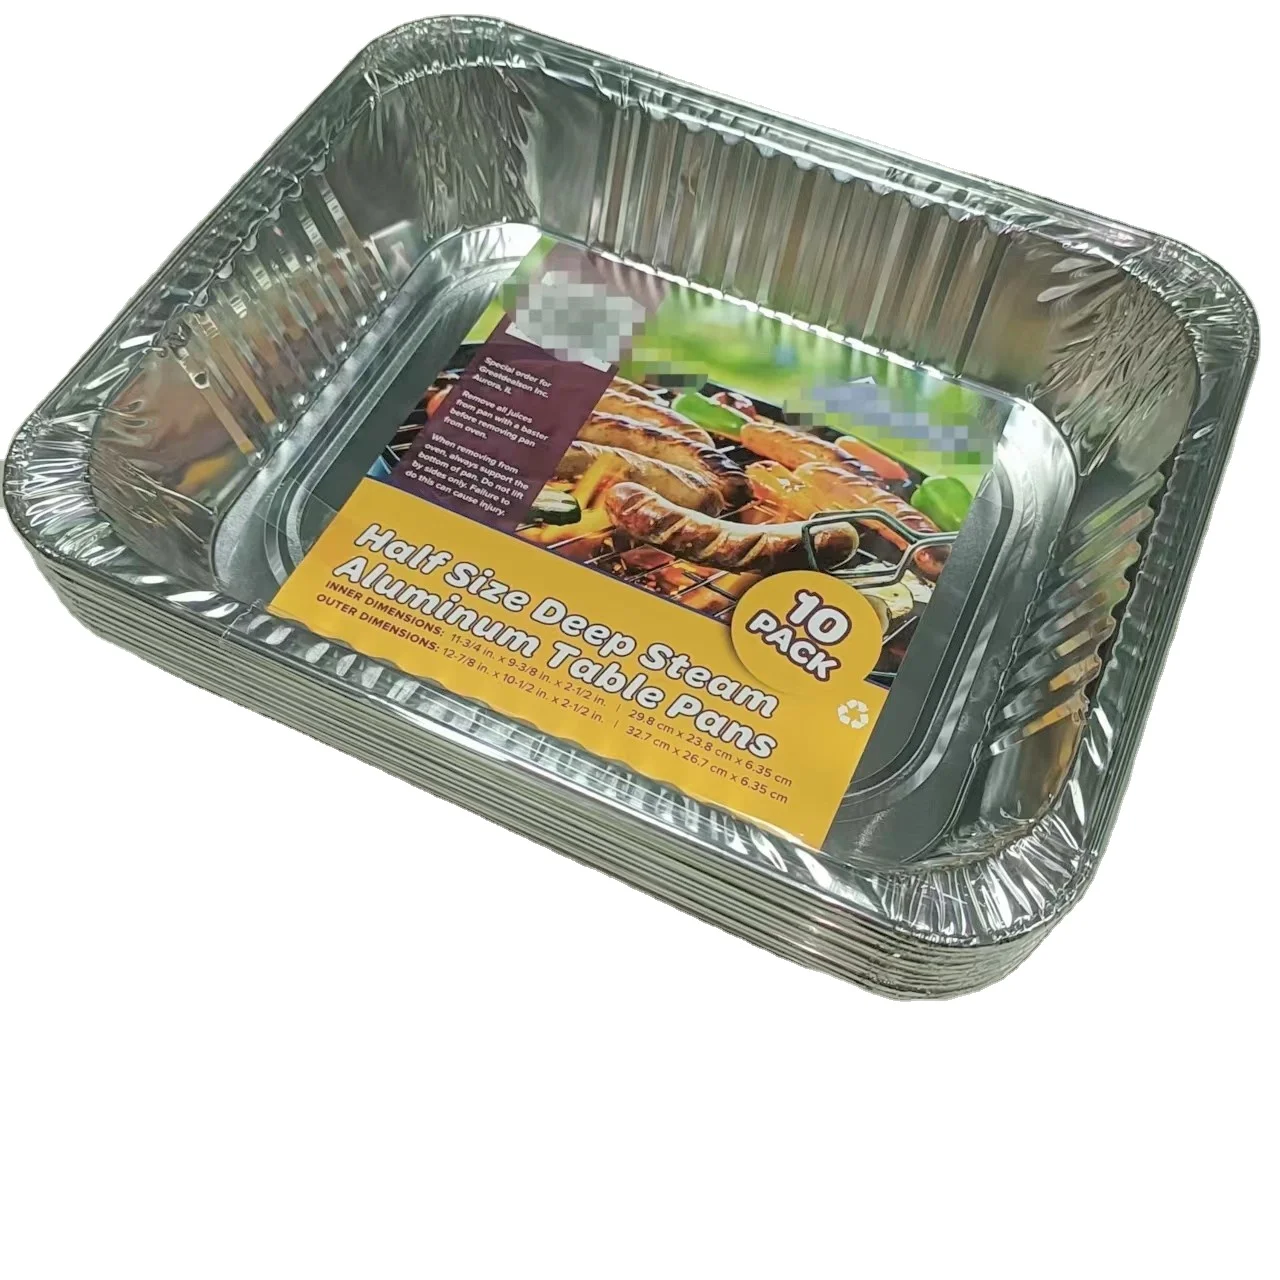 Aluminum Pan 9x13 Disposable Aluminum Foil Tray Heavy Duty Baking Tray,  Half Size Deep Steam Table Tray - Tin Foil Pot Is Ideal for Cooking,  Baking, Heating, Storage, 